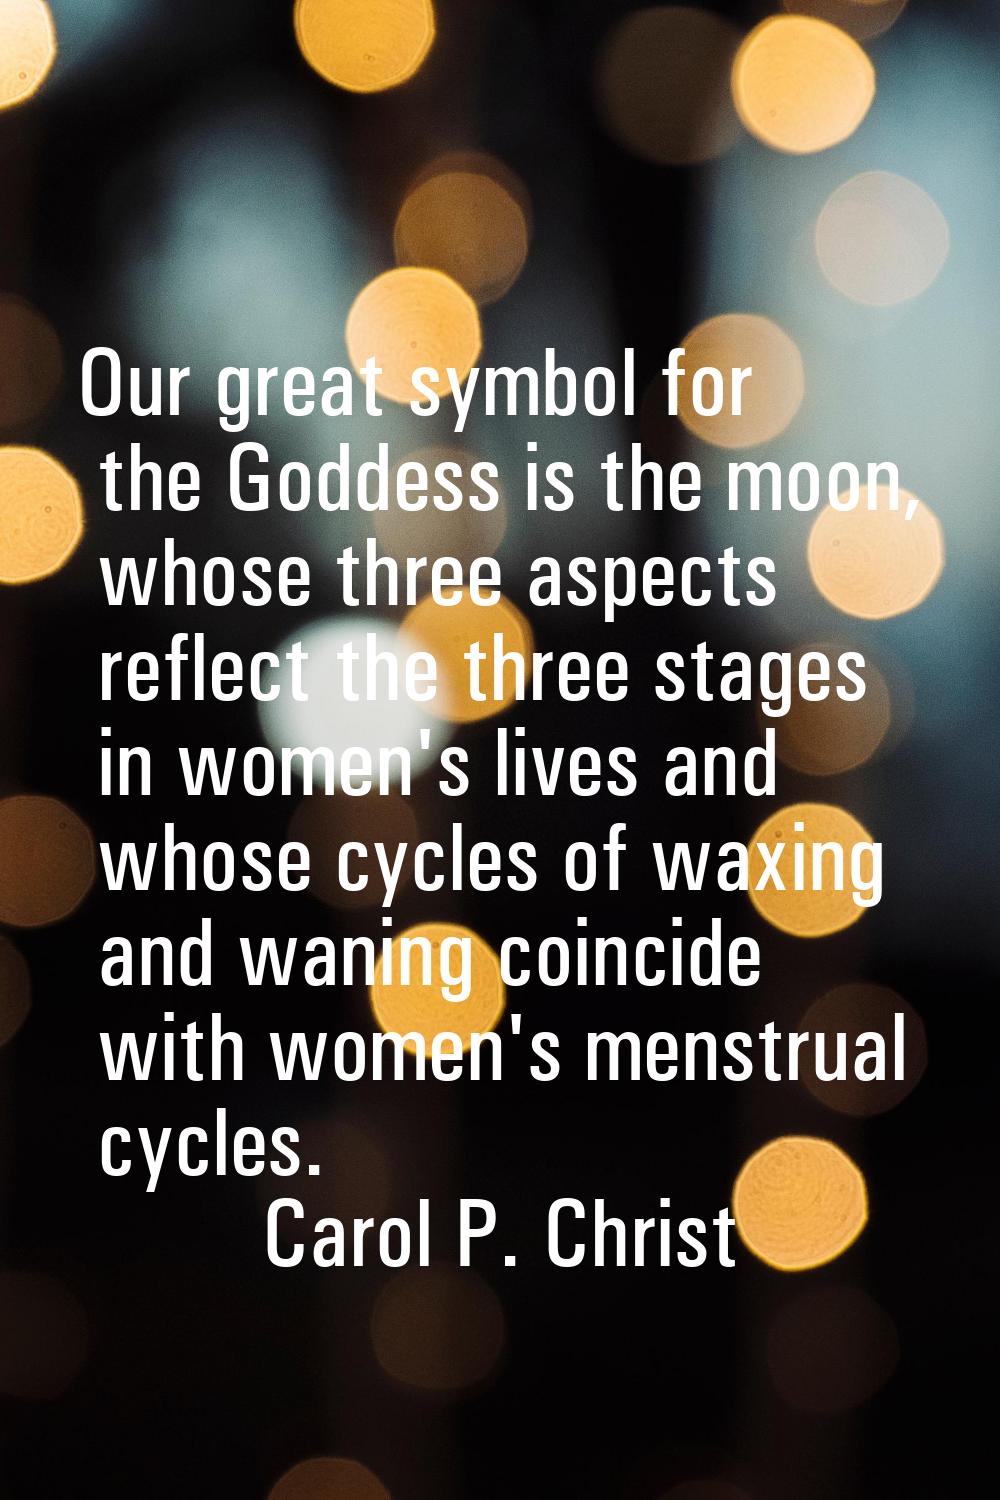 Our great symbol for the Goddess is the moon, whose three aspects reflect the three stages in women